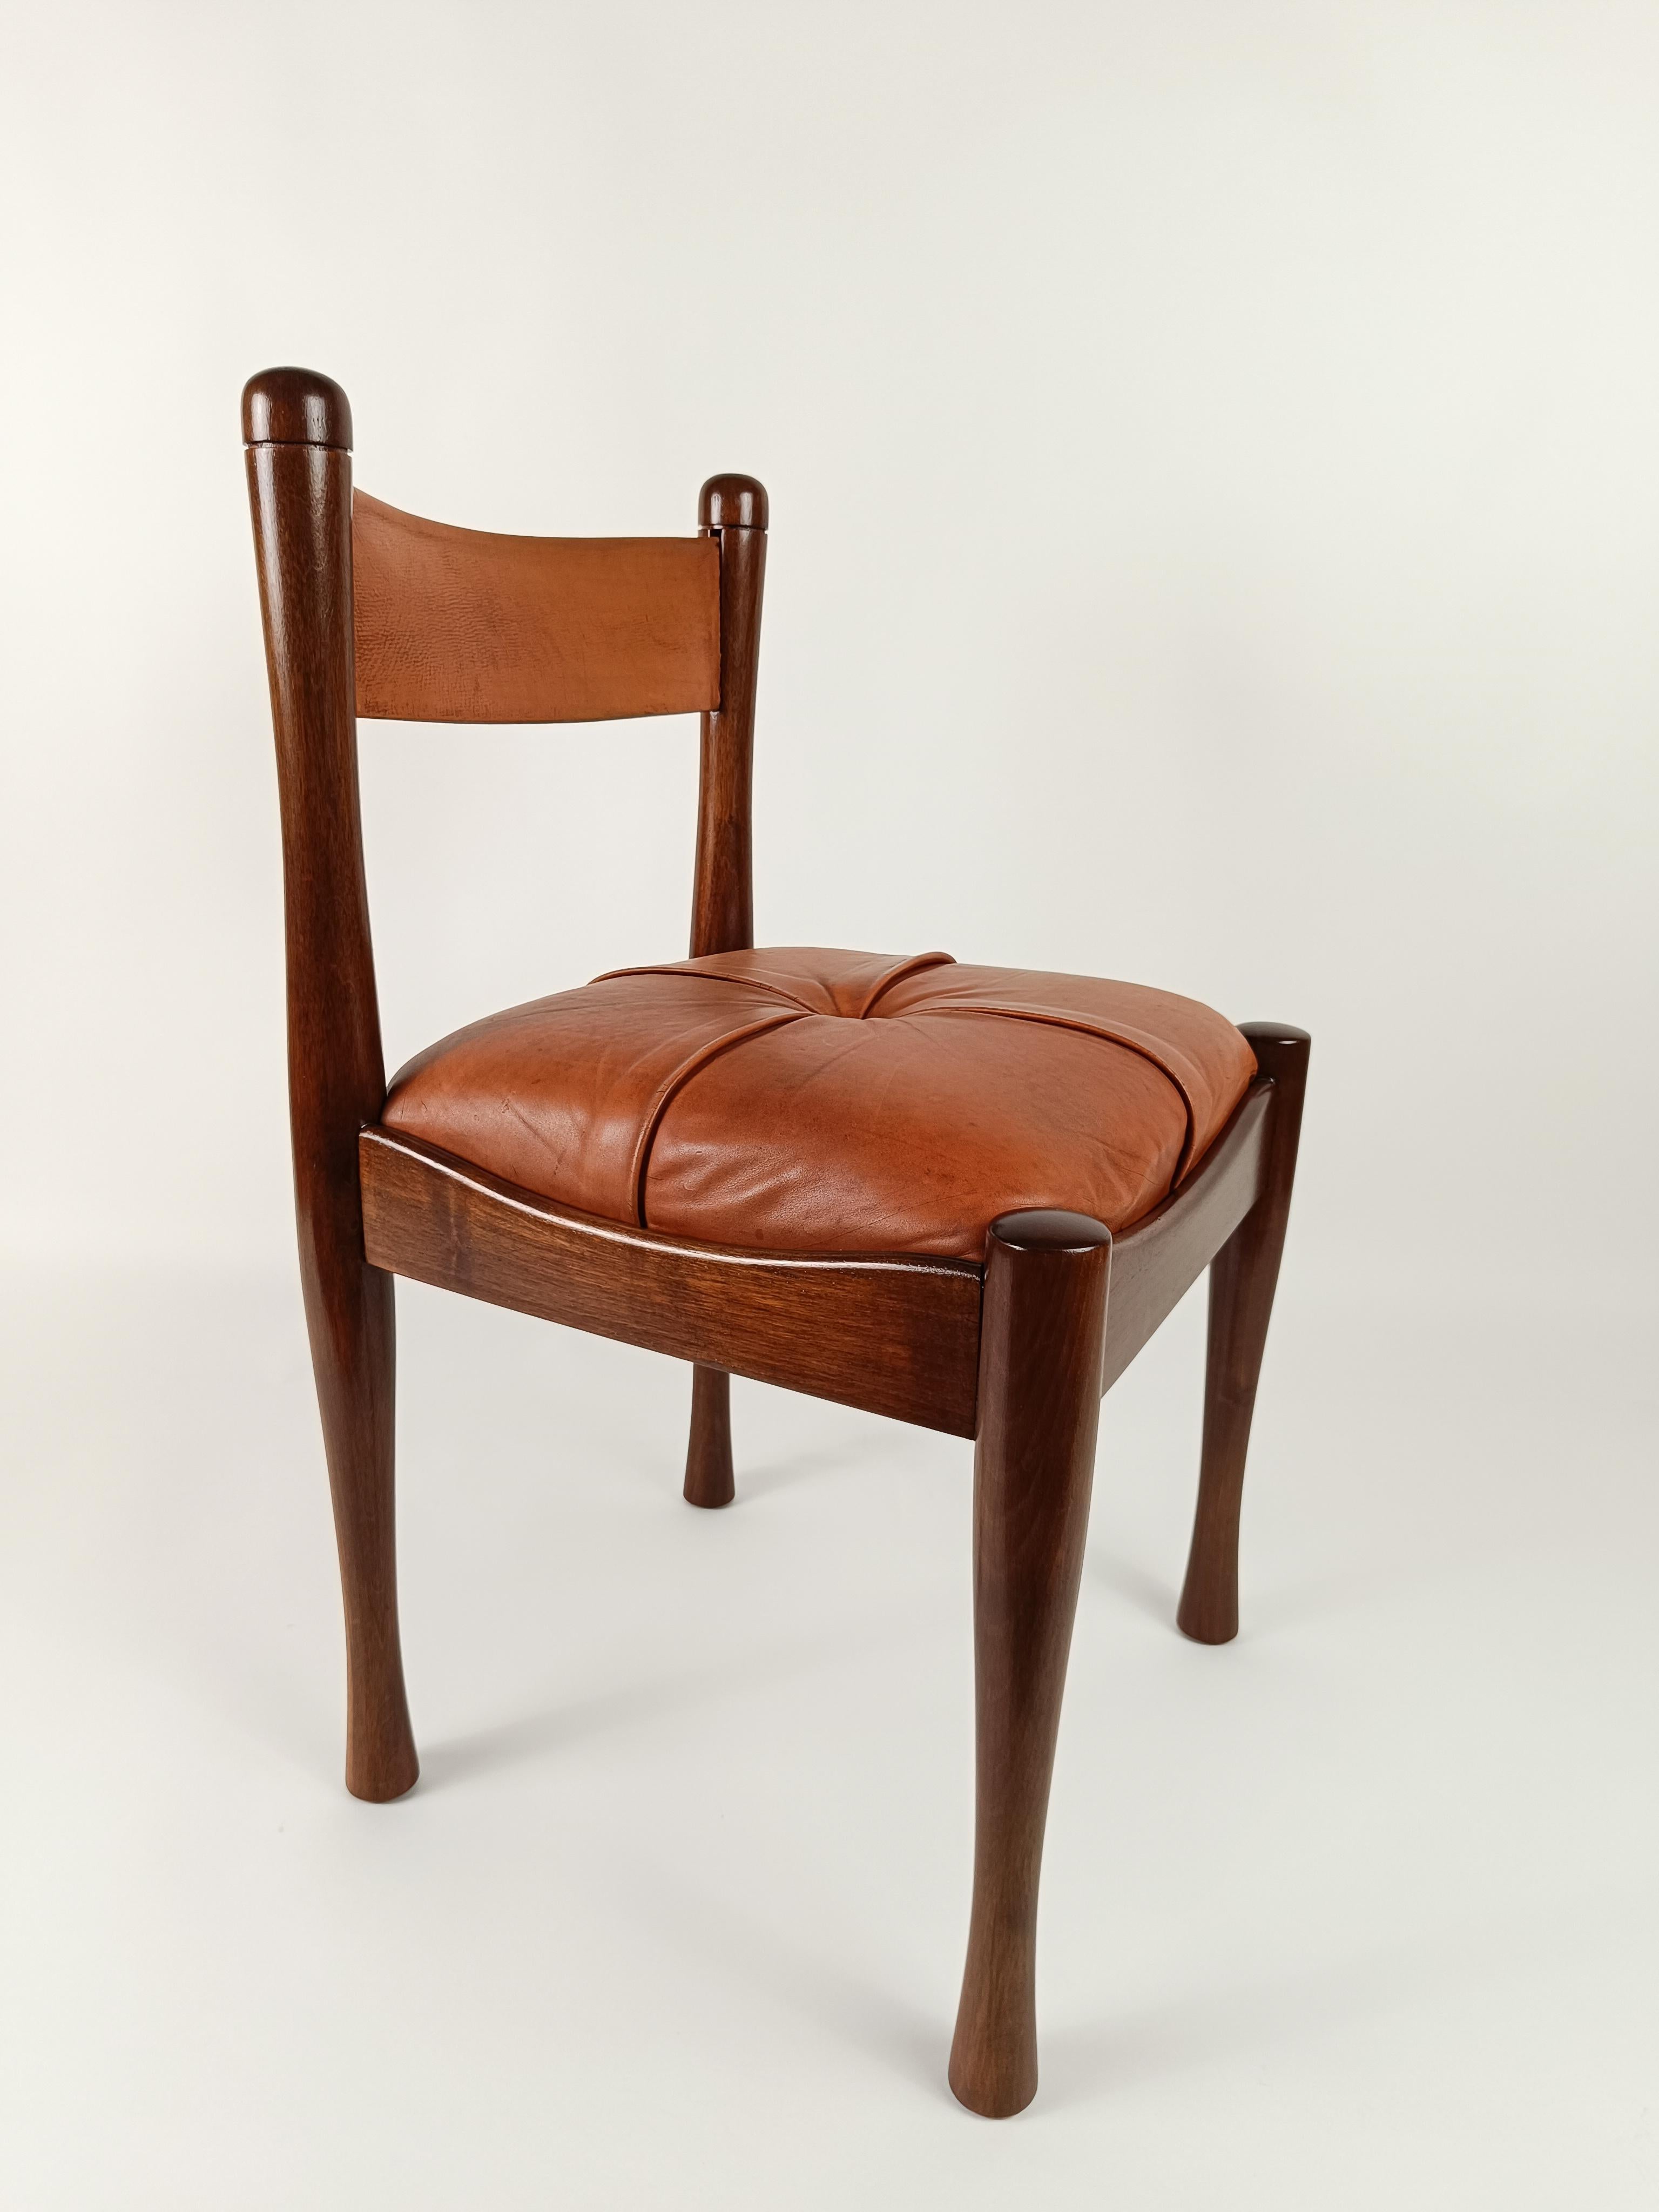 A set of 4 Italian Chairs in Wood and Cognac Leather by S. Coppola for Bernini  For Sale 8